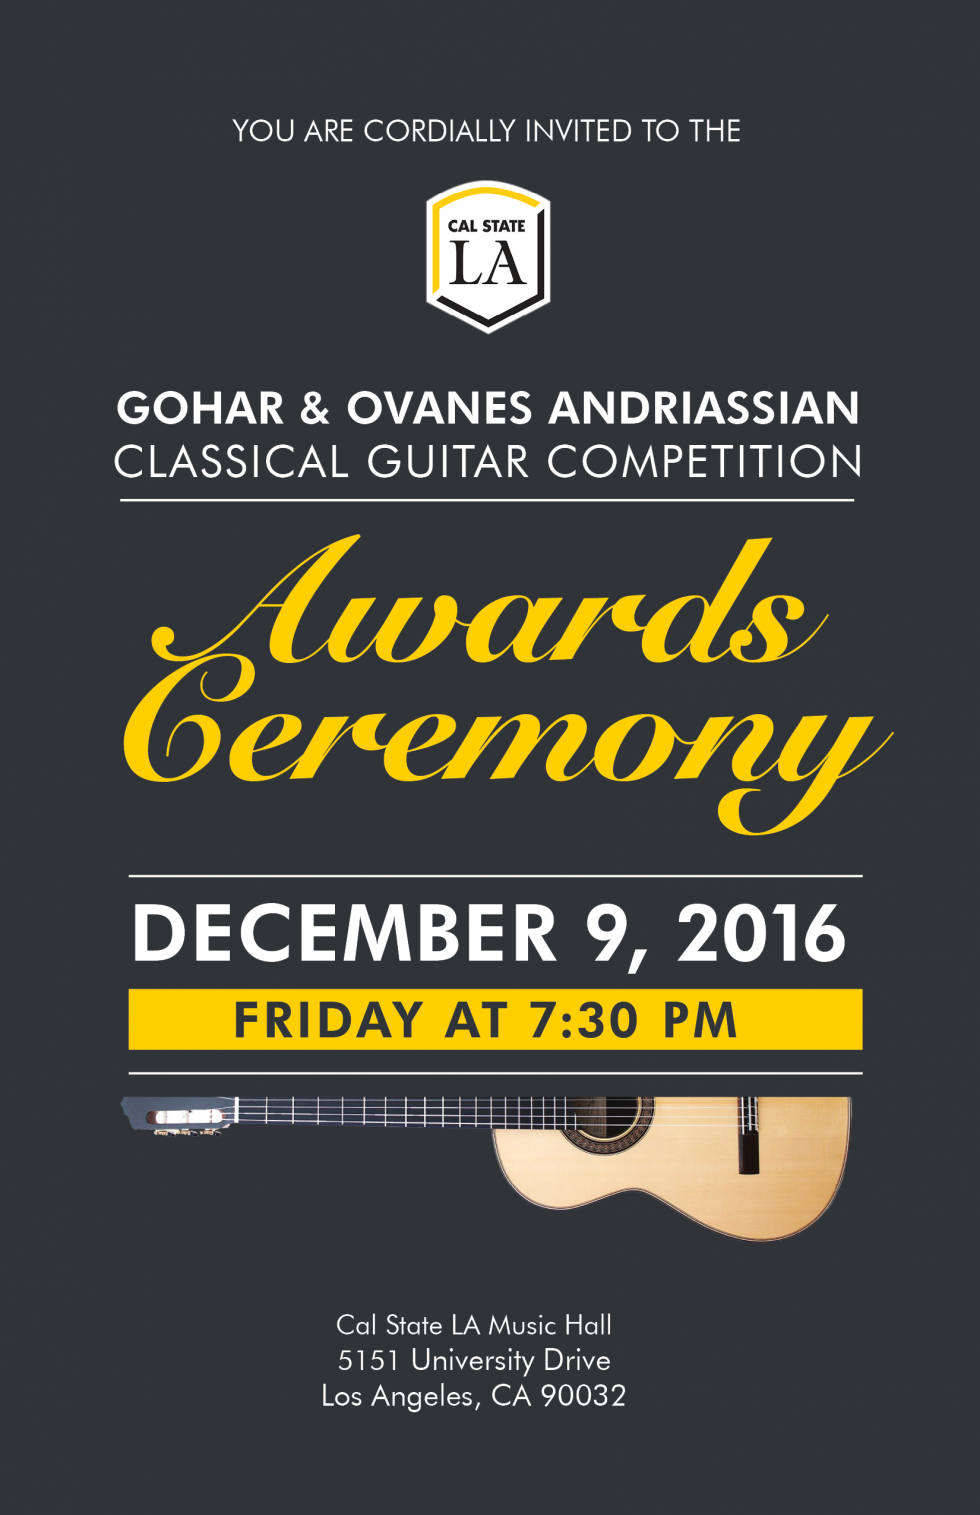 guitar competition dec 9 in music hall 7:30 pm